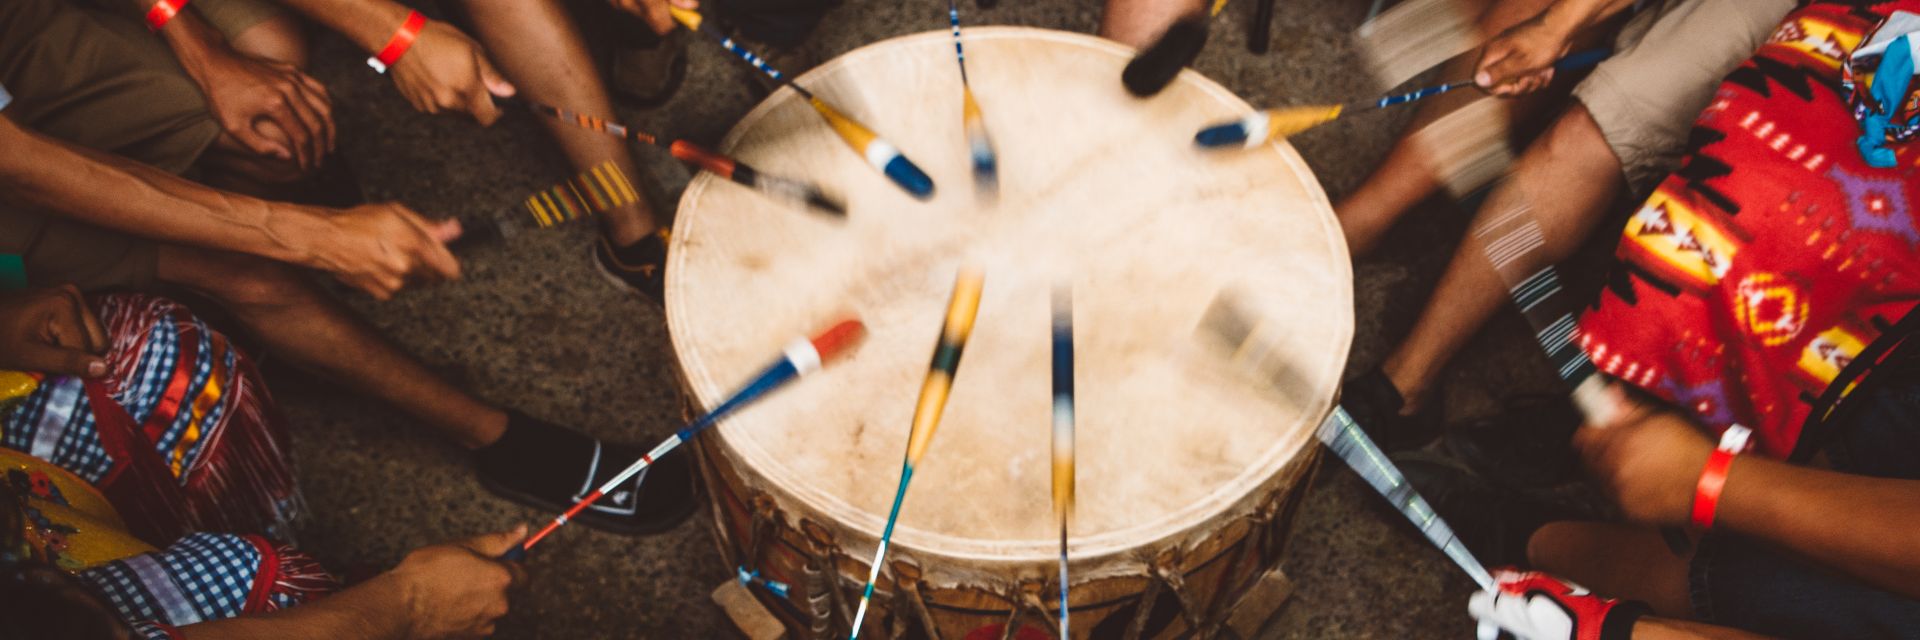 A group of people play a Indigenous drum together in a small circle